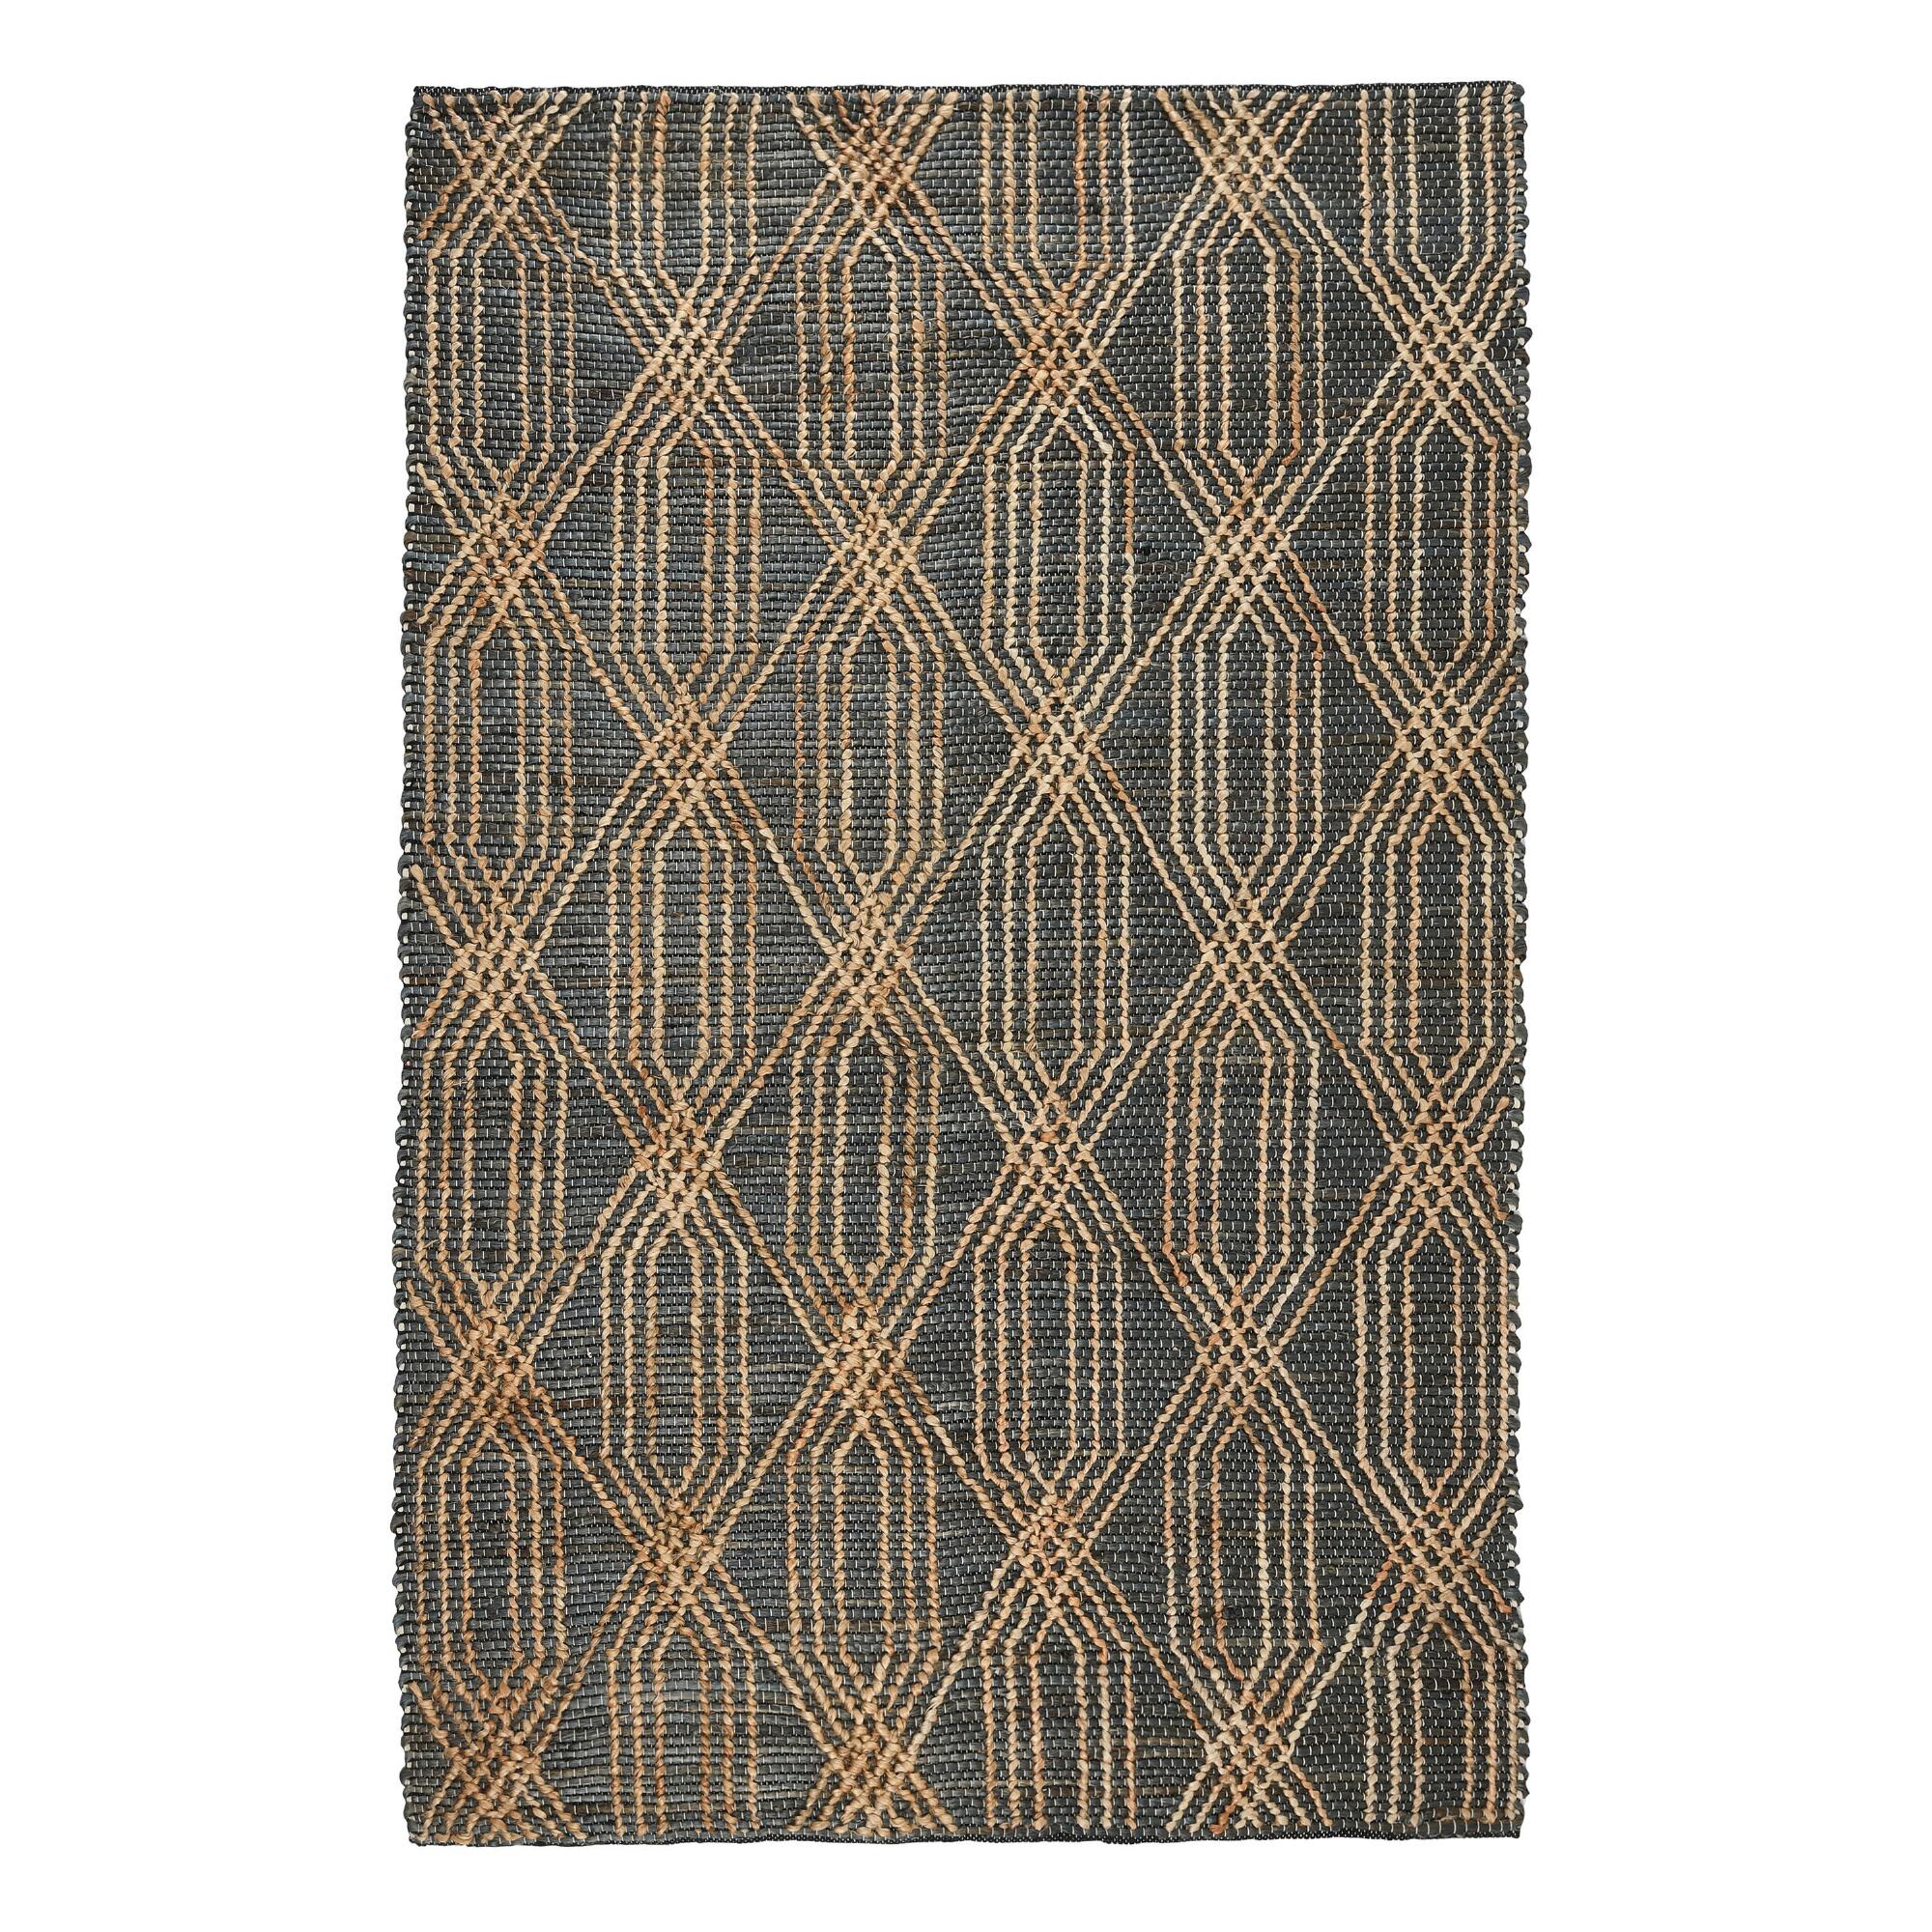 Charcoal Blue And Natural Geometric Jute Tustin Area Rug: Blue/Natural - Cotton - Runner/Runner 8' Length by World Market